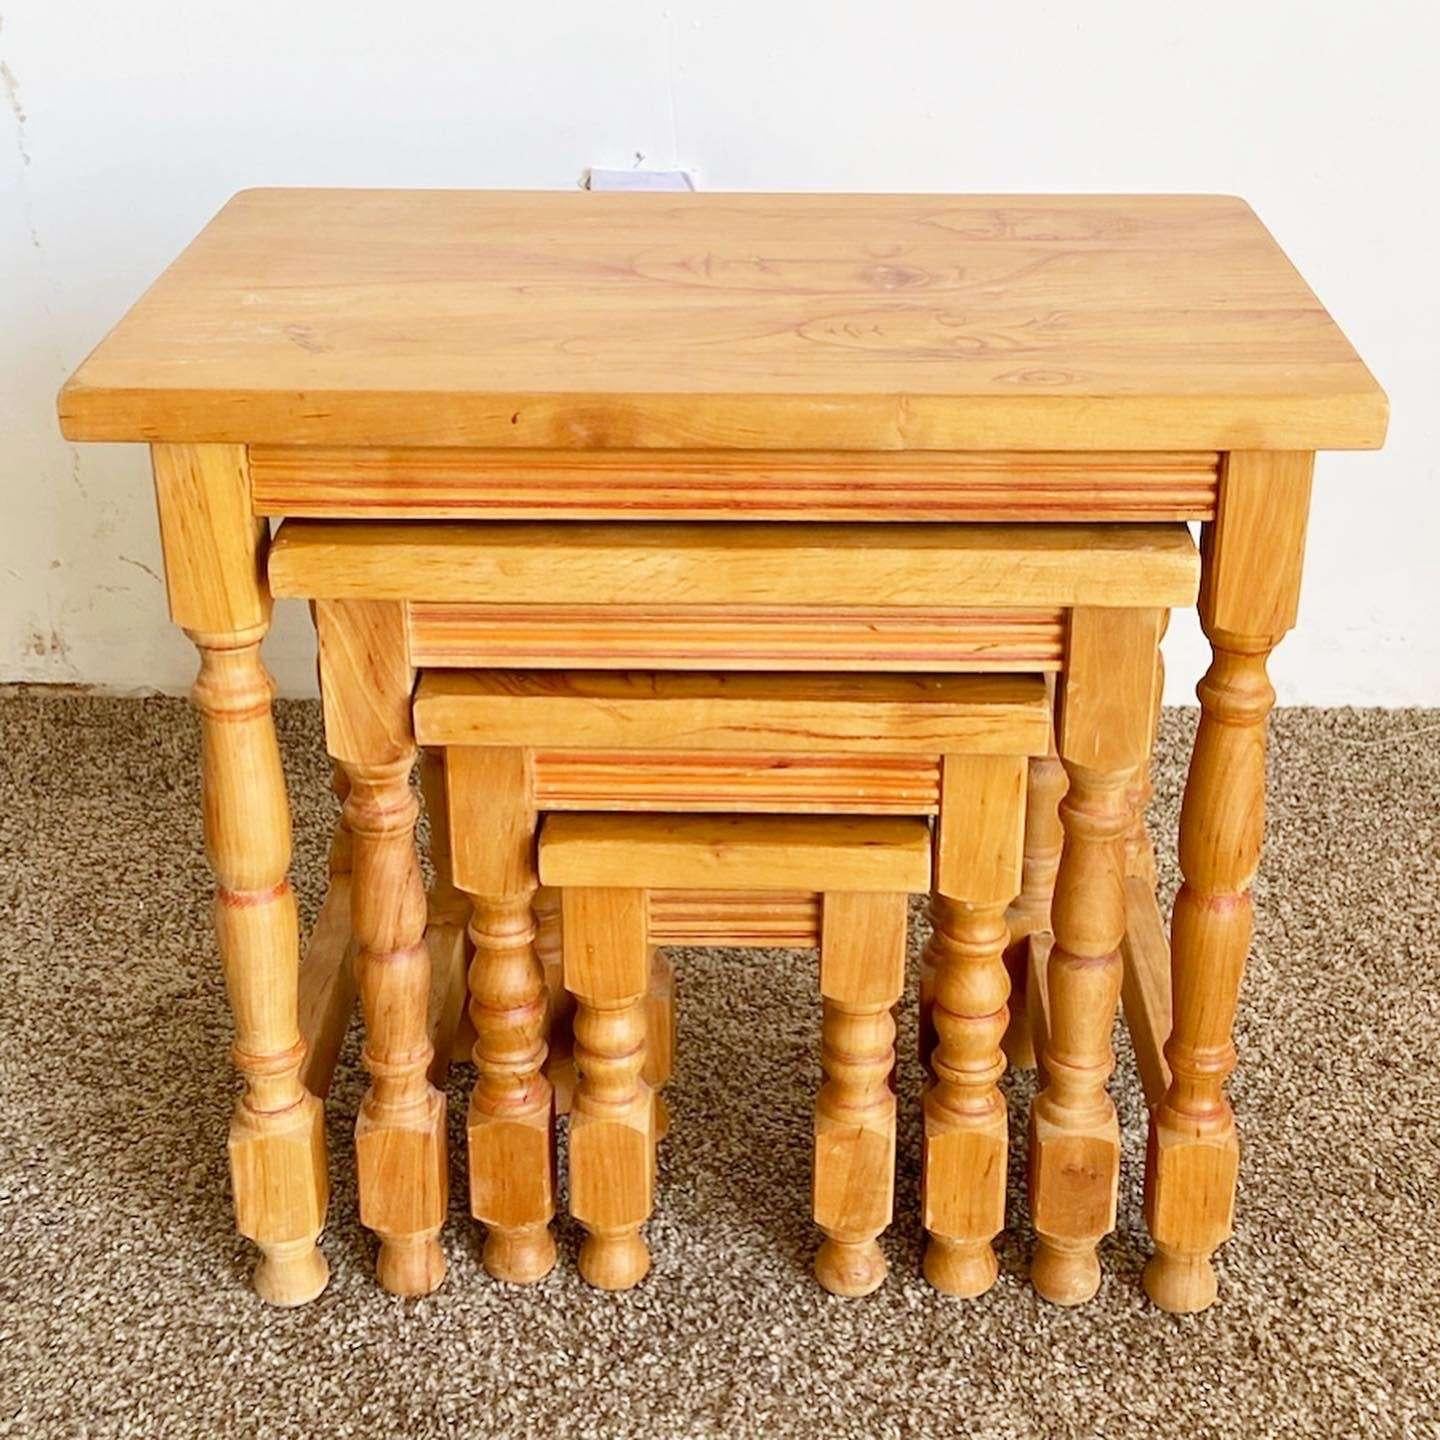 American Vintage Wooden Hand Drawn Female Body Form Nesting Tables - Set of 4 For Sale